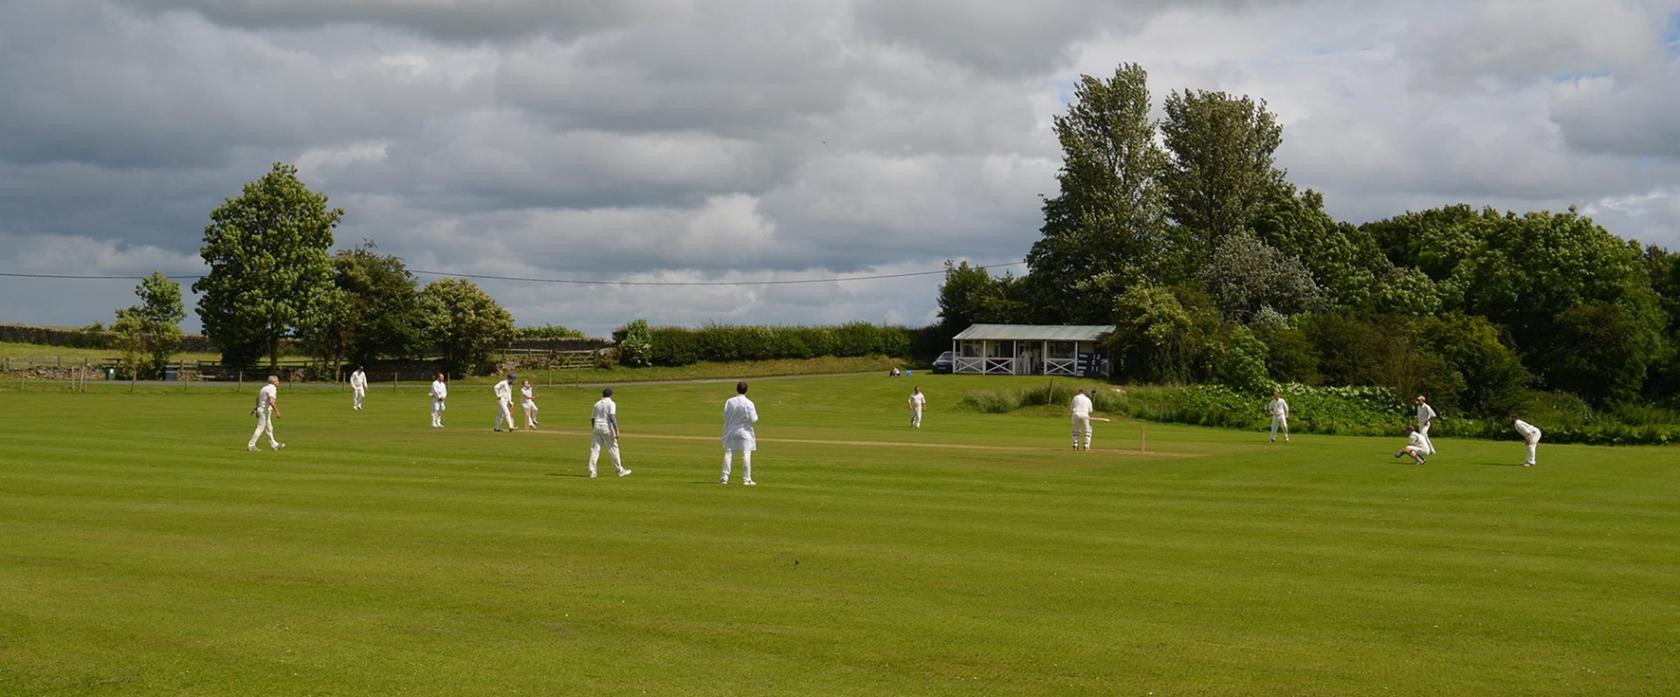 IN ACTION:  The picturesque Aldbrough St John ground. Having taken the title in last season’s revamped Covid-affected season, Aldbrough will be among the favourites for honours this season